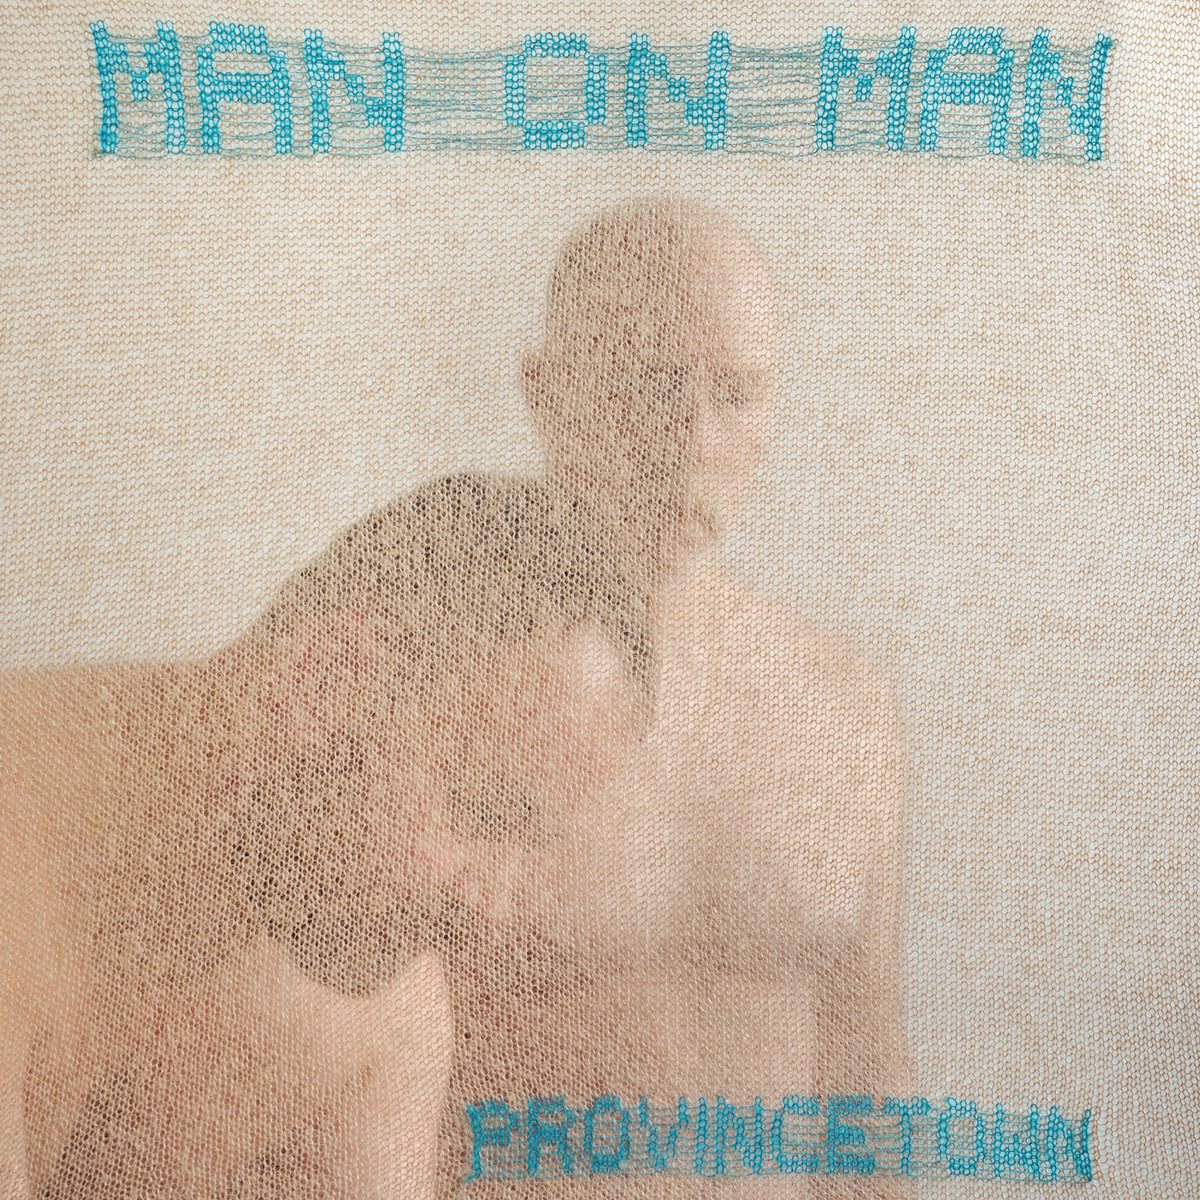 Our new album PROVINCETOWN will be released June 16th on Polyvinyl Records. Pre-orders for limited edition first and test pressings are now available. polyvinylrecords.com/product/provin…